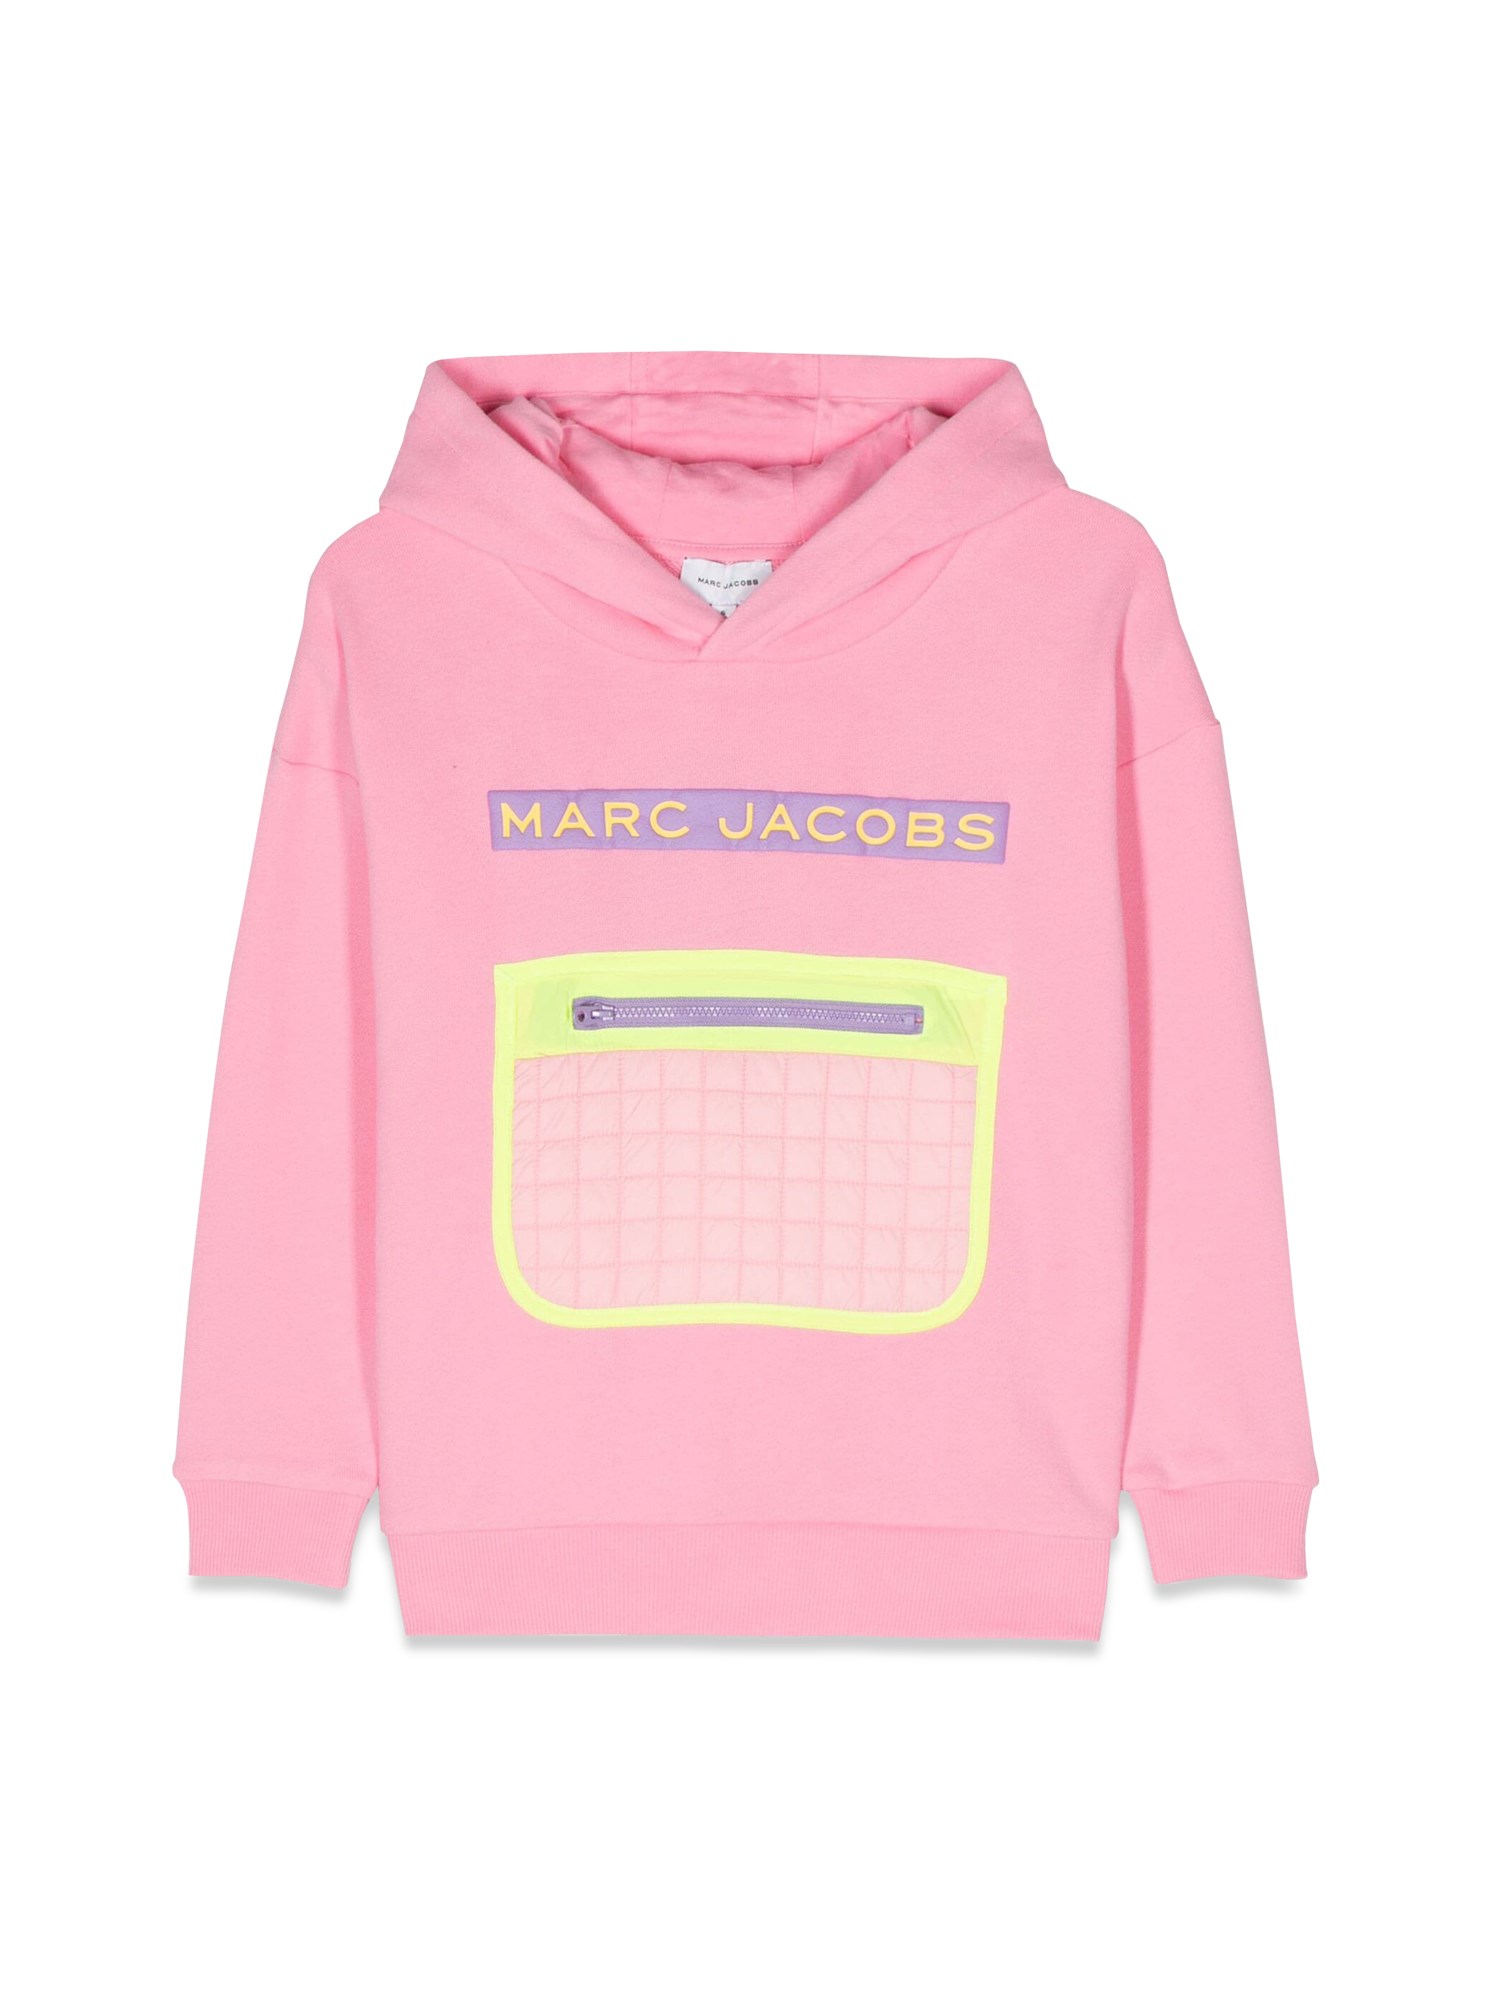 marc jacobs hoodie with pocket